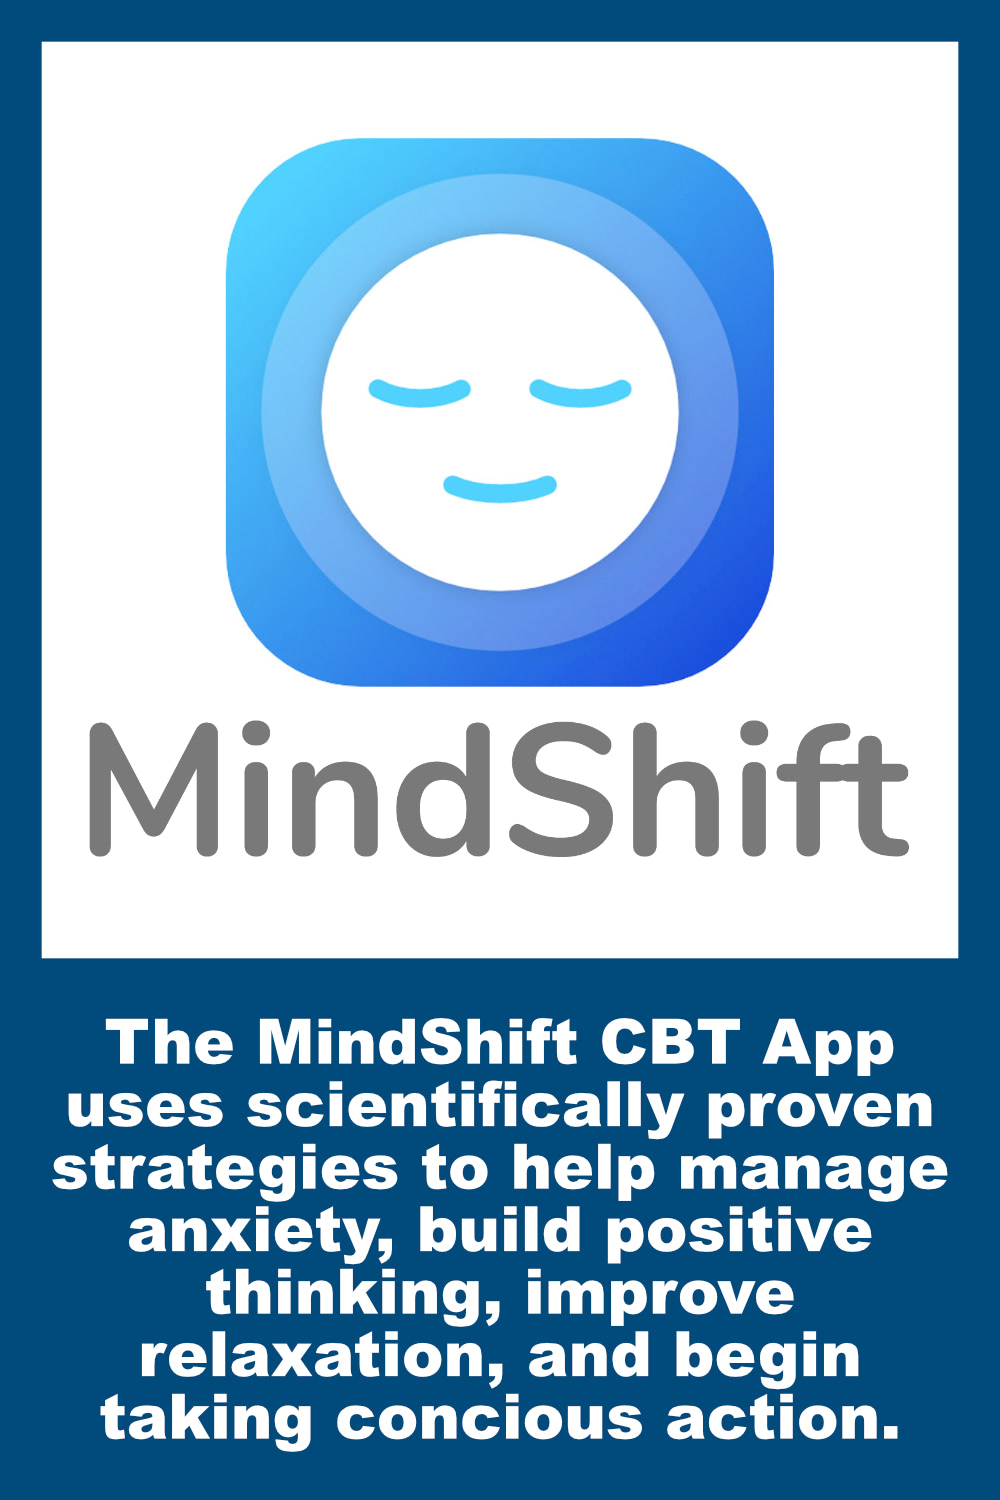 The MindShift CBT App uses scientifically proven strategies to help manage anxiety, build positive thinking, improve relaxation, and begin taking concious action.